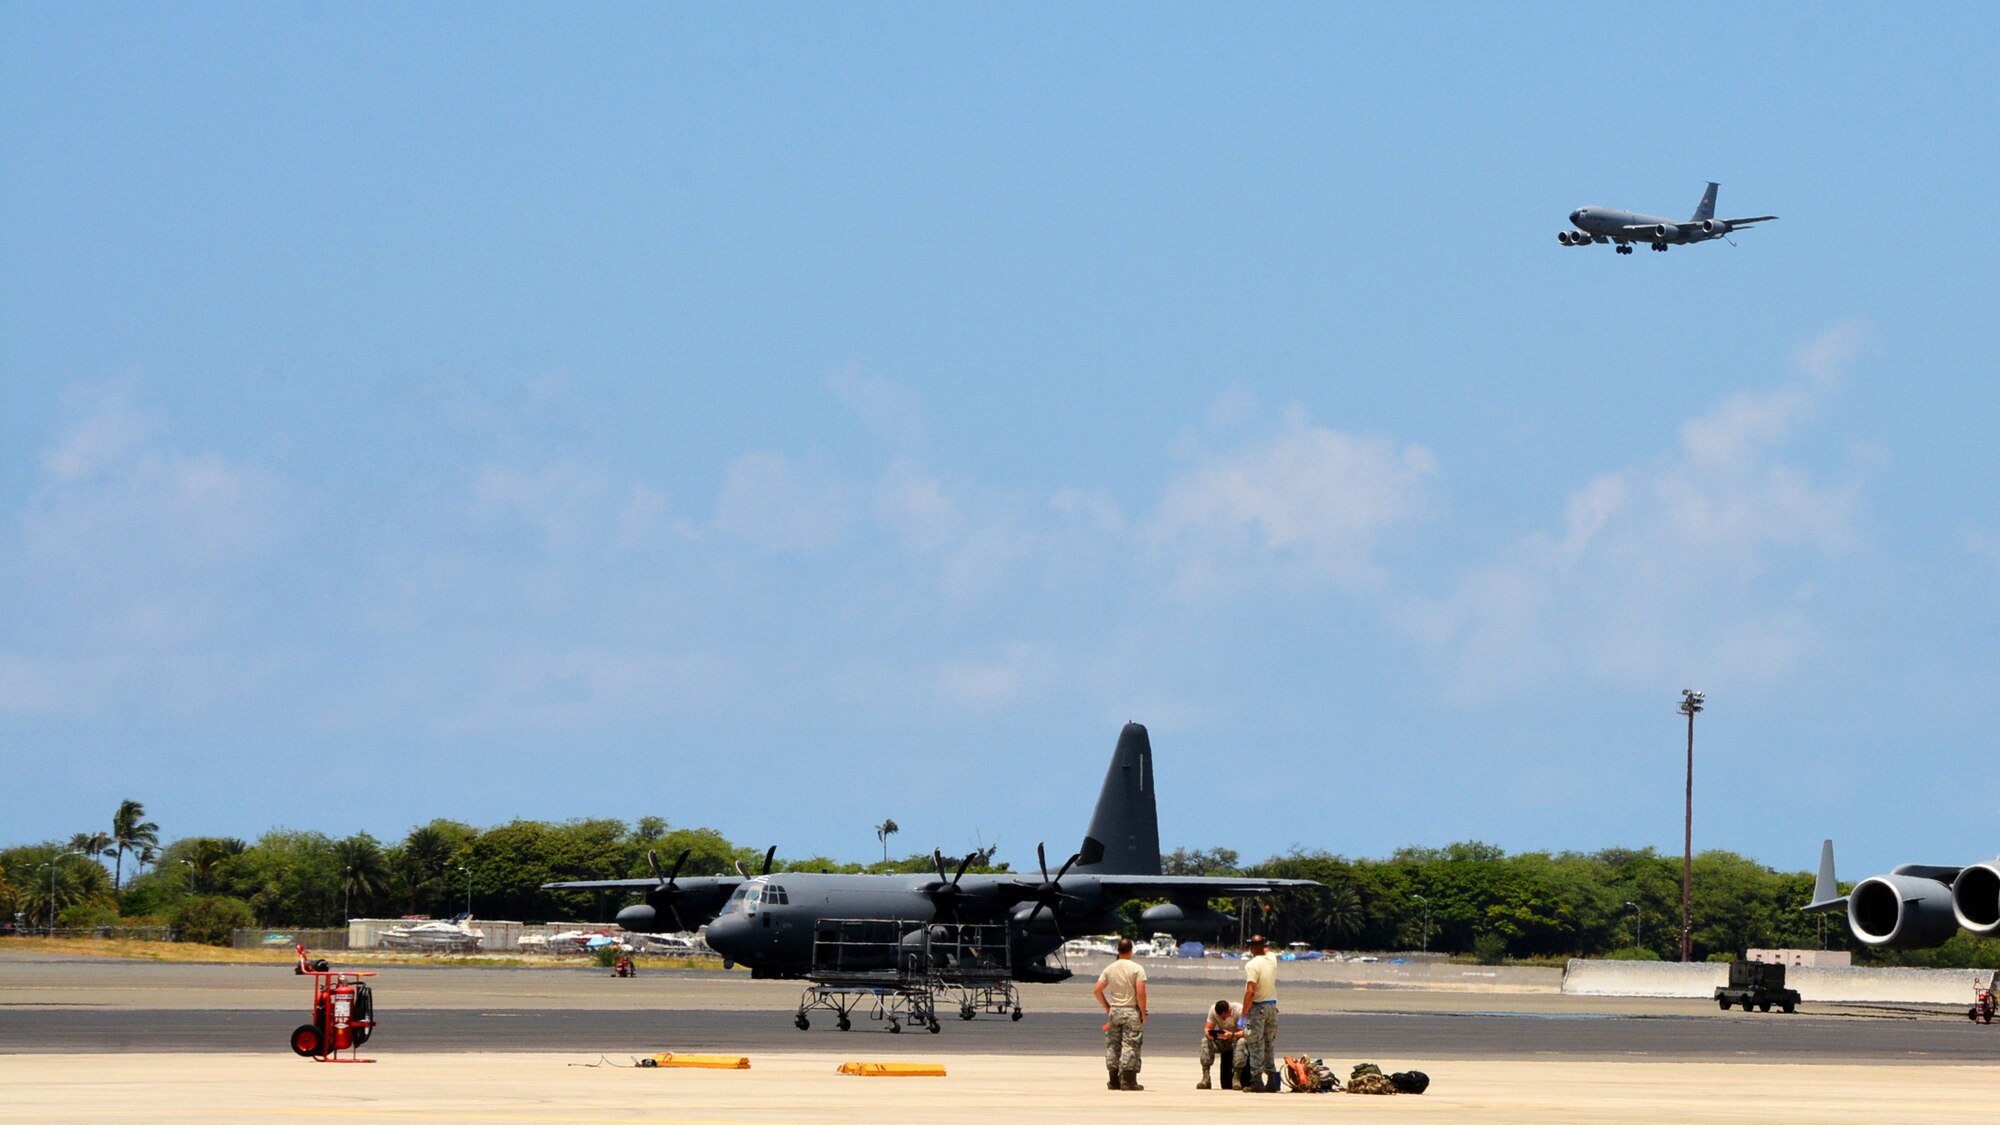 JOINT BASE PEARL HARBOR-HICKAM - U.S. Air Force maintenance crews with the 507th Aircraft Maintenance Squadron at Tinker Air Force Base, Okla., prepare to recover the KC-135R Stratotanker pictured landing overhead following an aerial refueling mission as part of Rim of the Pacific 2016. (U.S. Air Force photo\Tech. Sgt. Lauren Gleason)